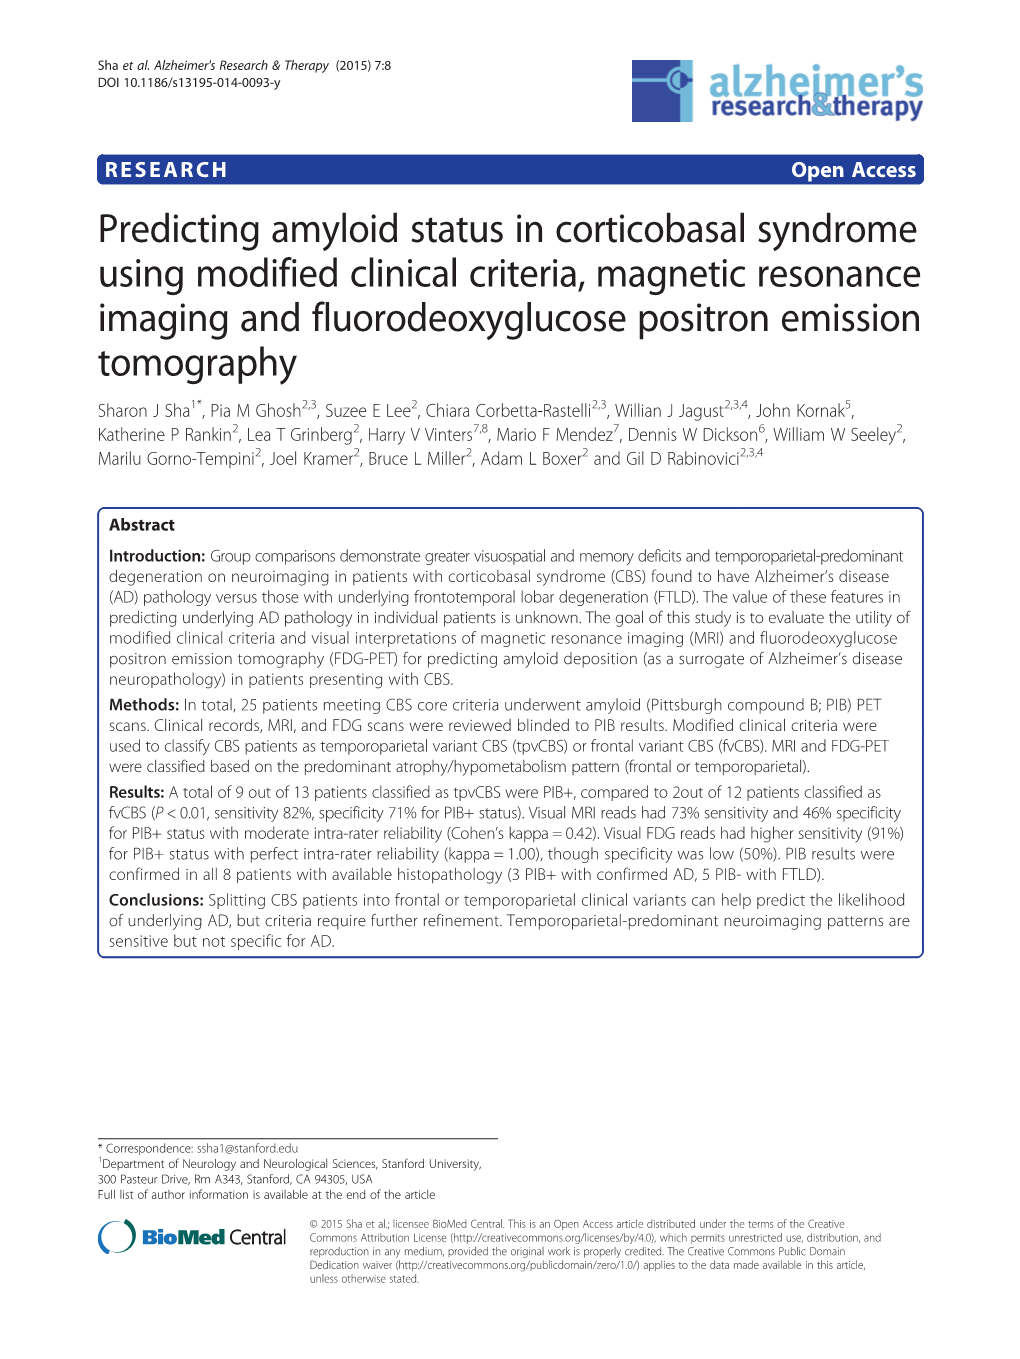 Predicting Amyloid Status in Corticobasal Syndrome Using